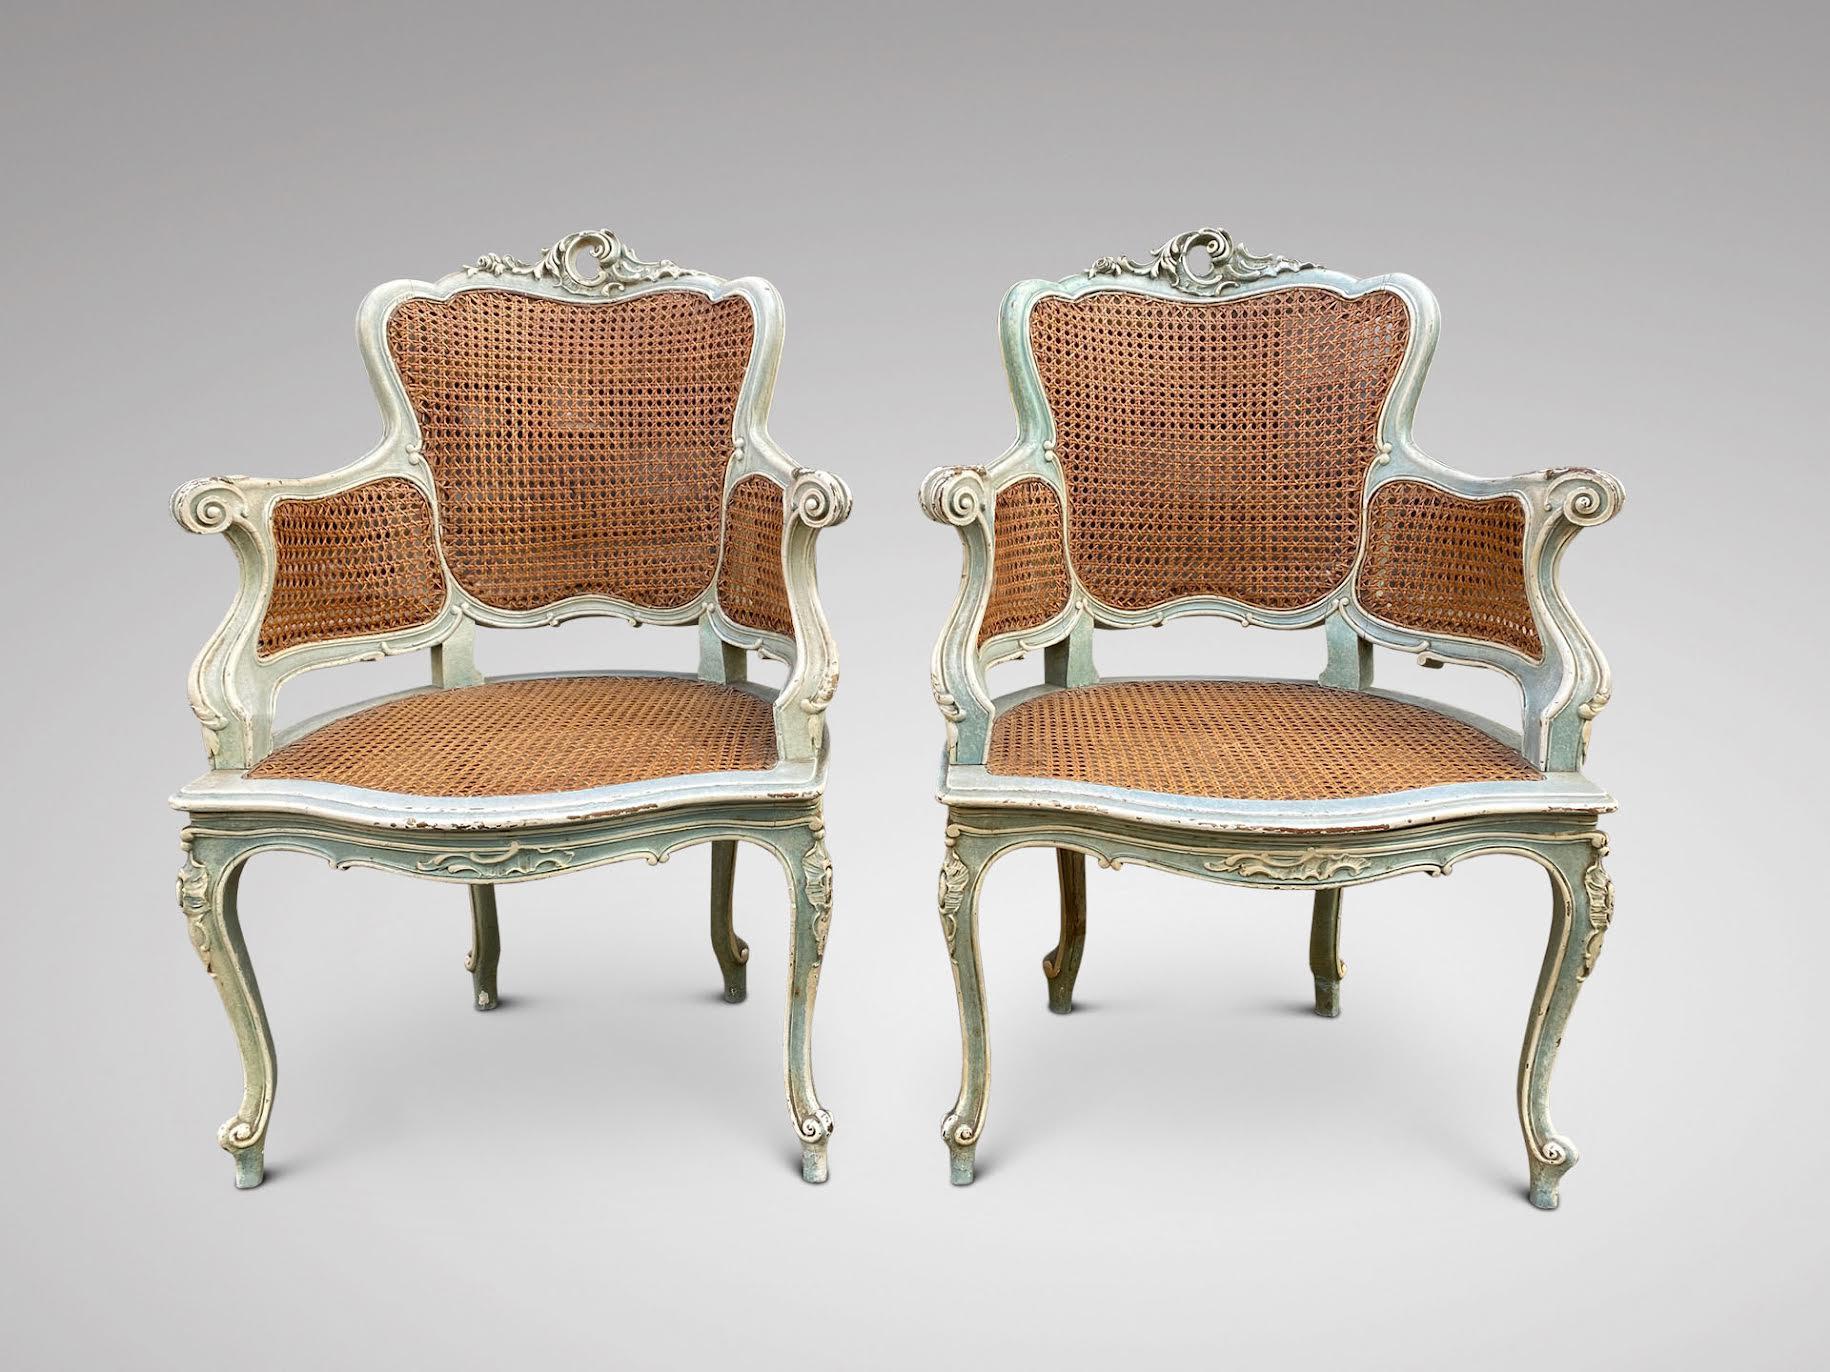 A quality pair of French 19th century light blue white painted carved cane armchairs. Finely hand carved and extremely comfortable this pair of armchairs features gorgeous sinuous lines typical of Louis XV period. Each fauteuil with twisted and